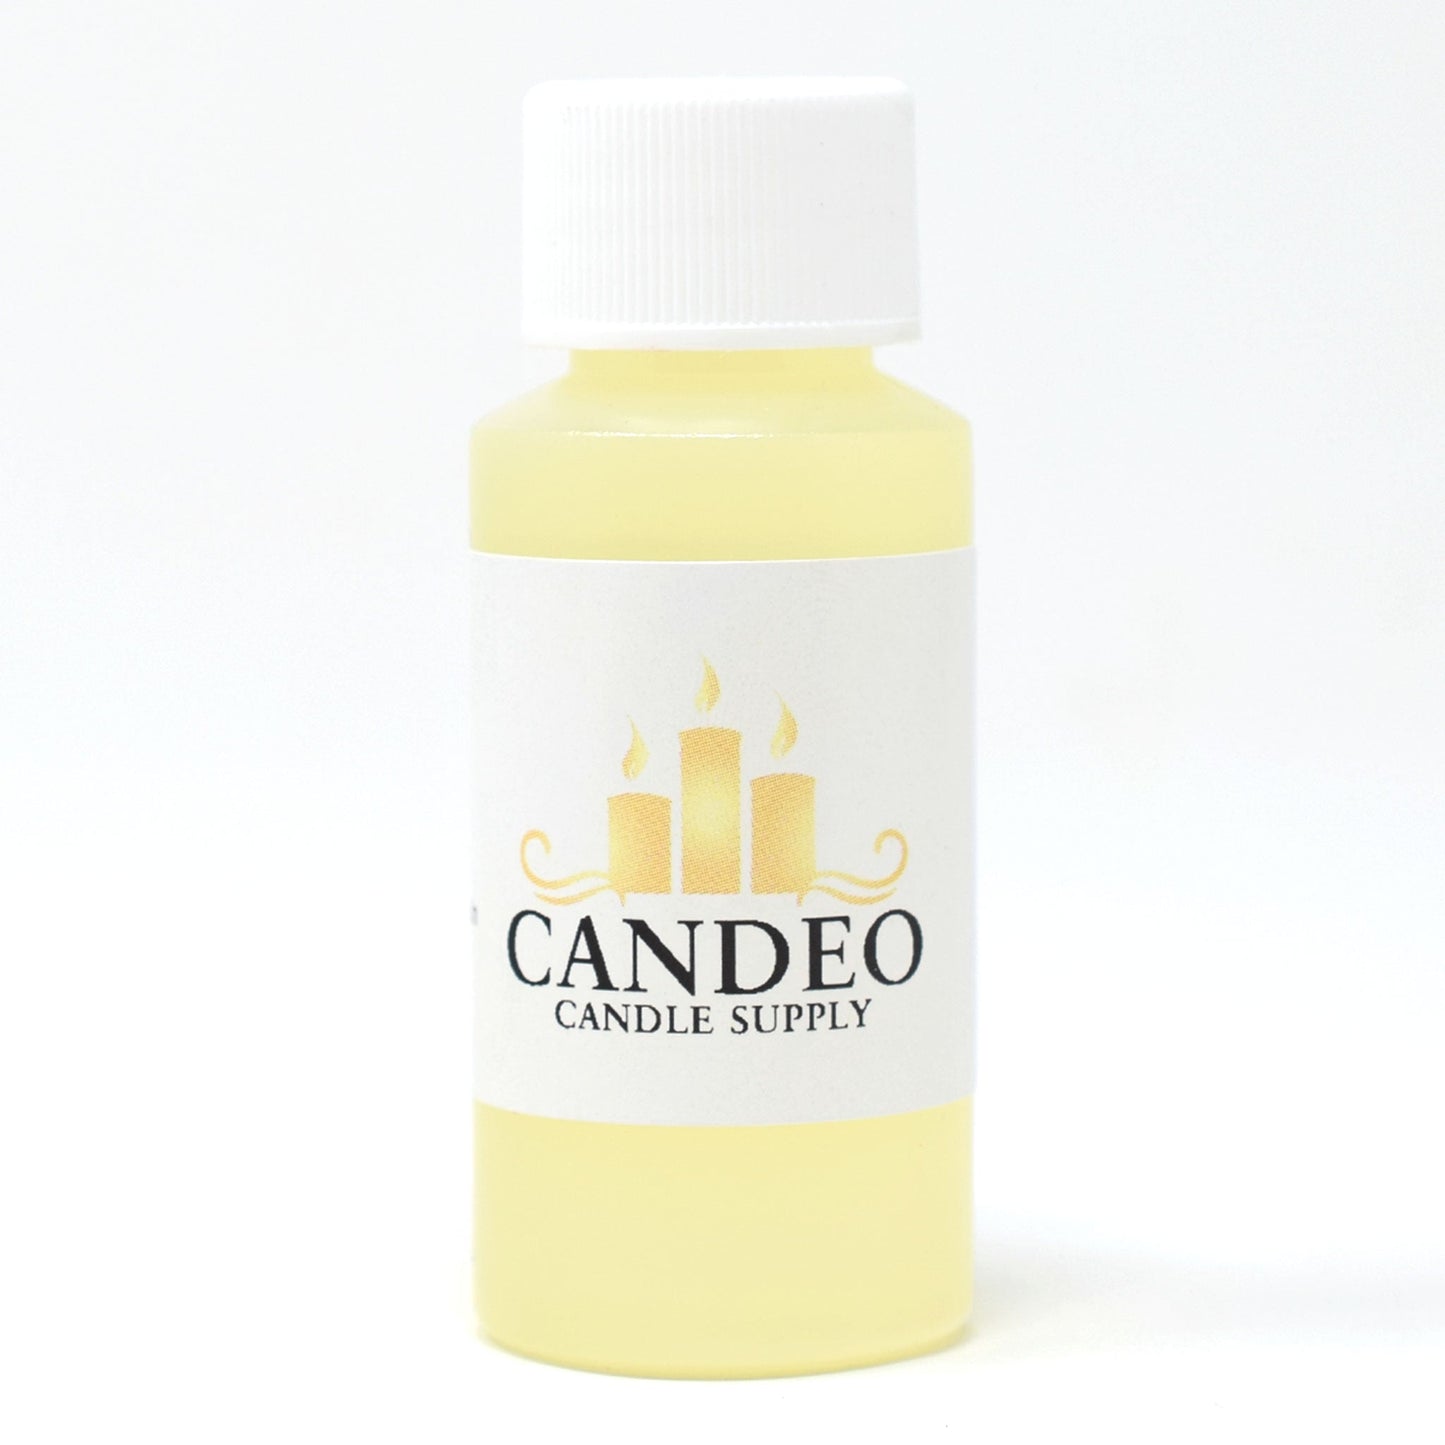 O' Christmas Tree Fragrance Oil - Candeo Candle Supply